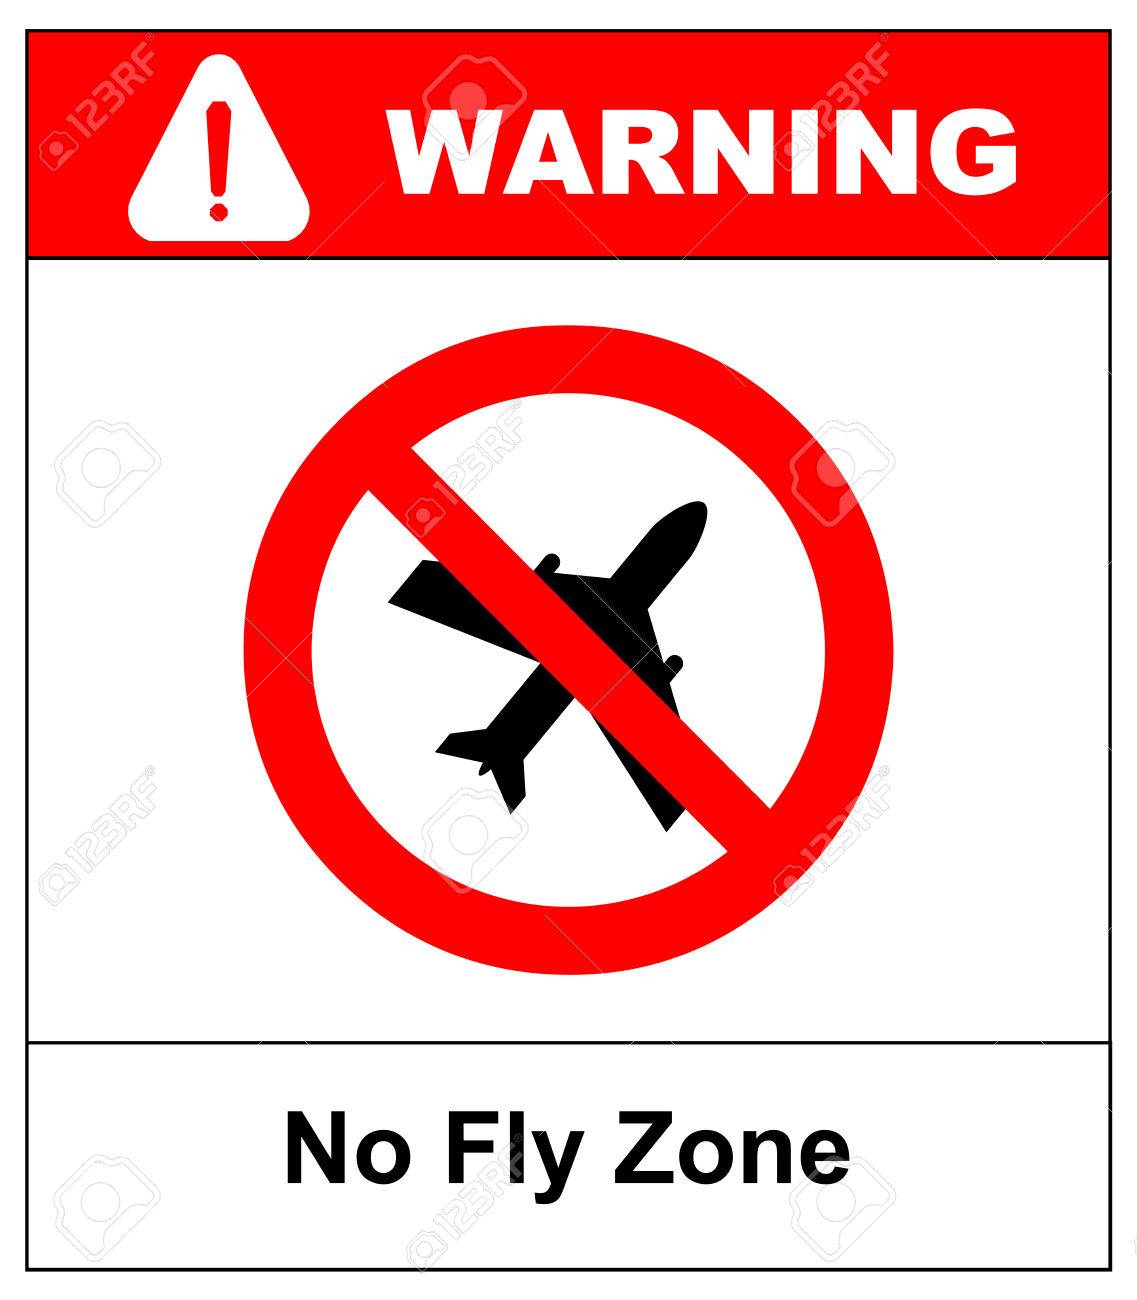 68973755-no-fly-zone-banner-no-flying-on-white-background-prohibit-sign-vector-in-red-circle.jpg